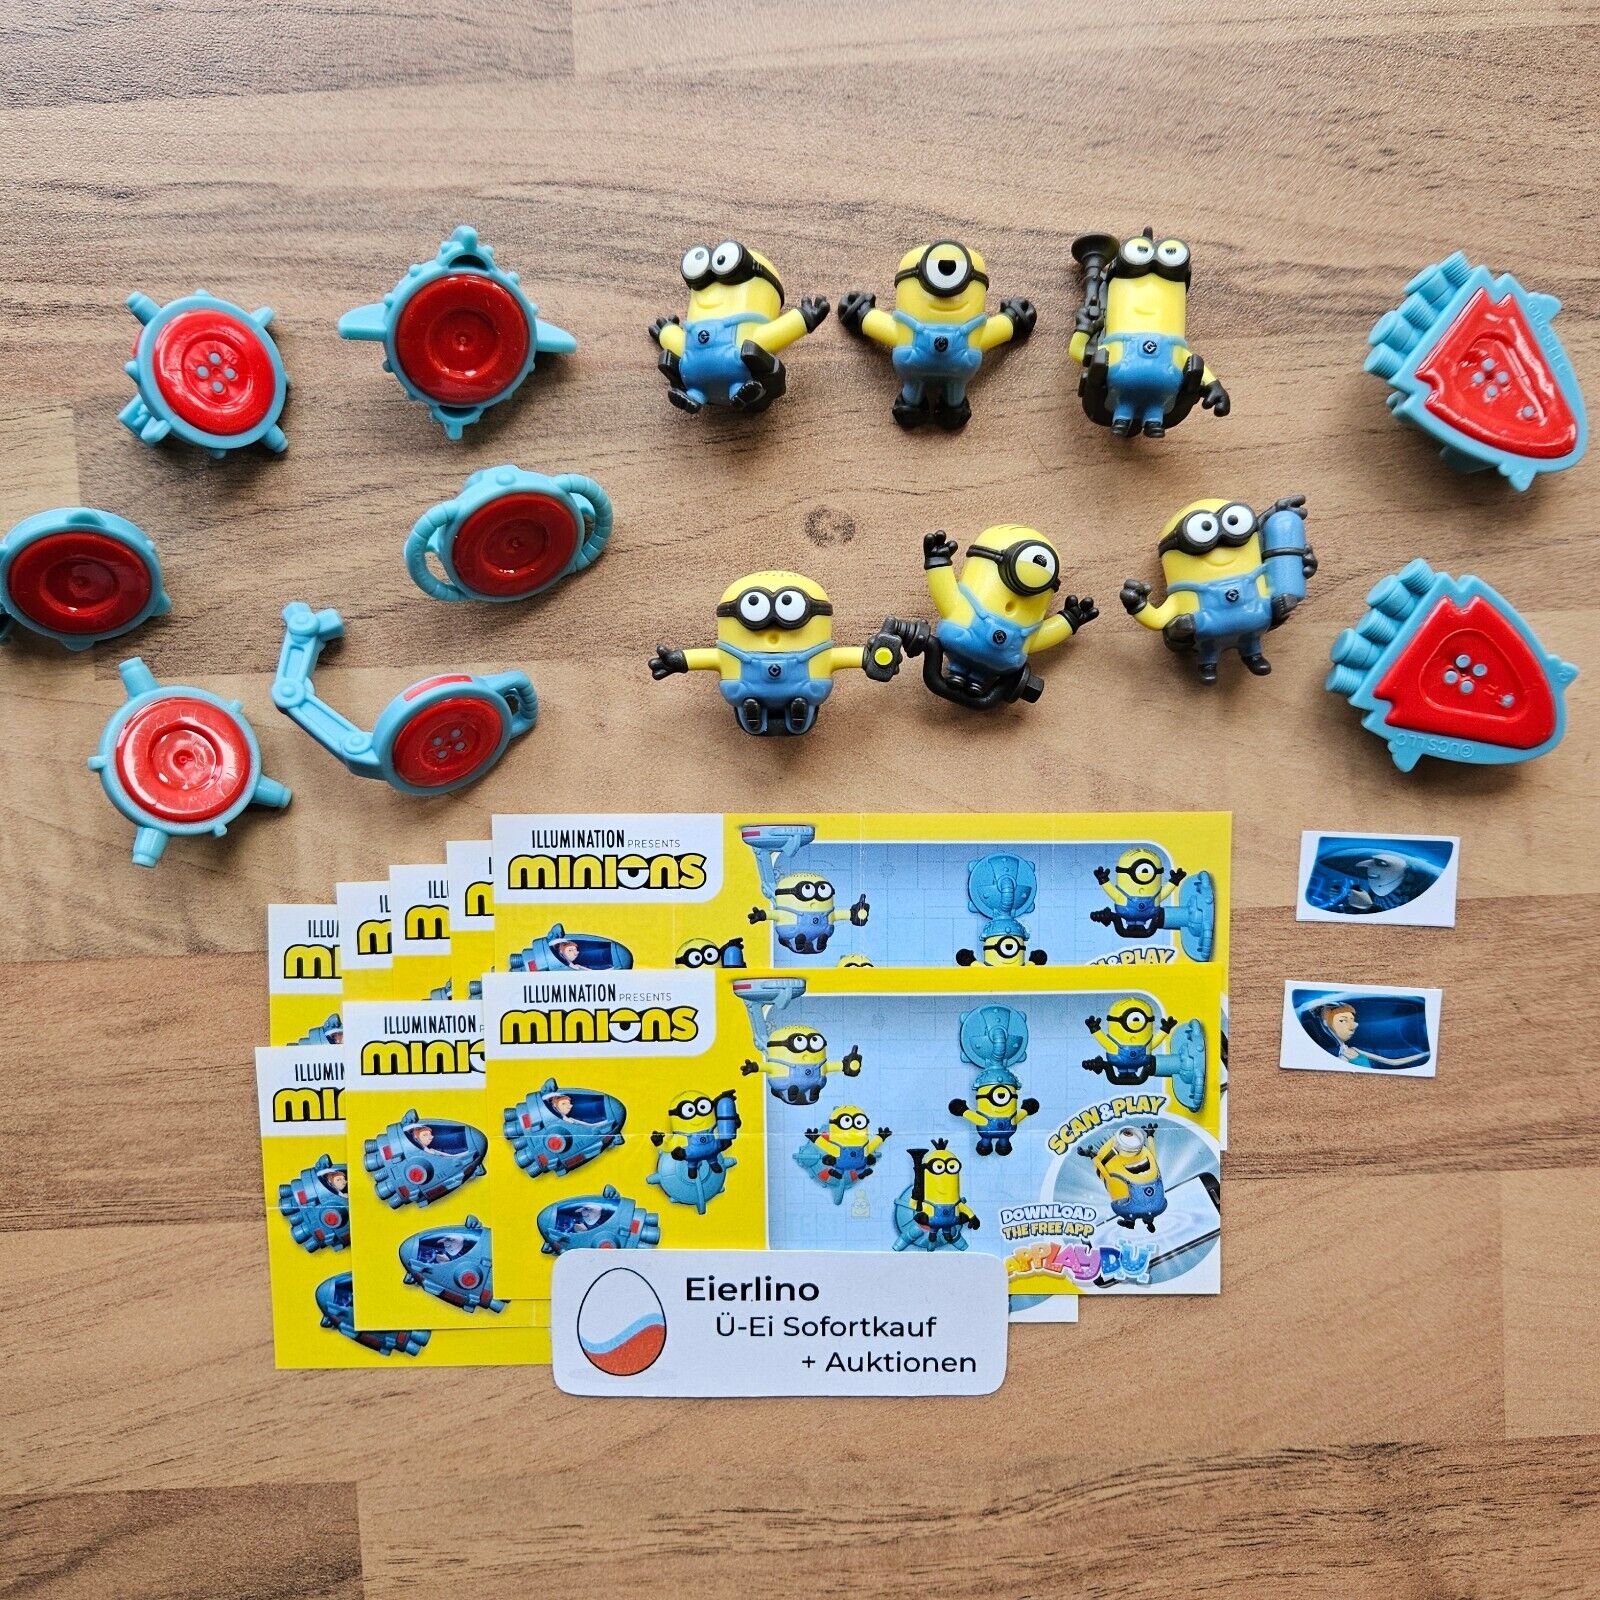 NEW DESCIPABLE ME 4 (Minions in Space) Kinder Joy complete set figurines (1.3\